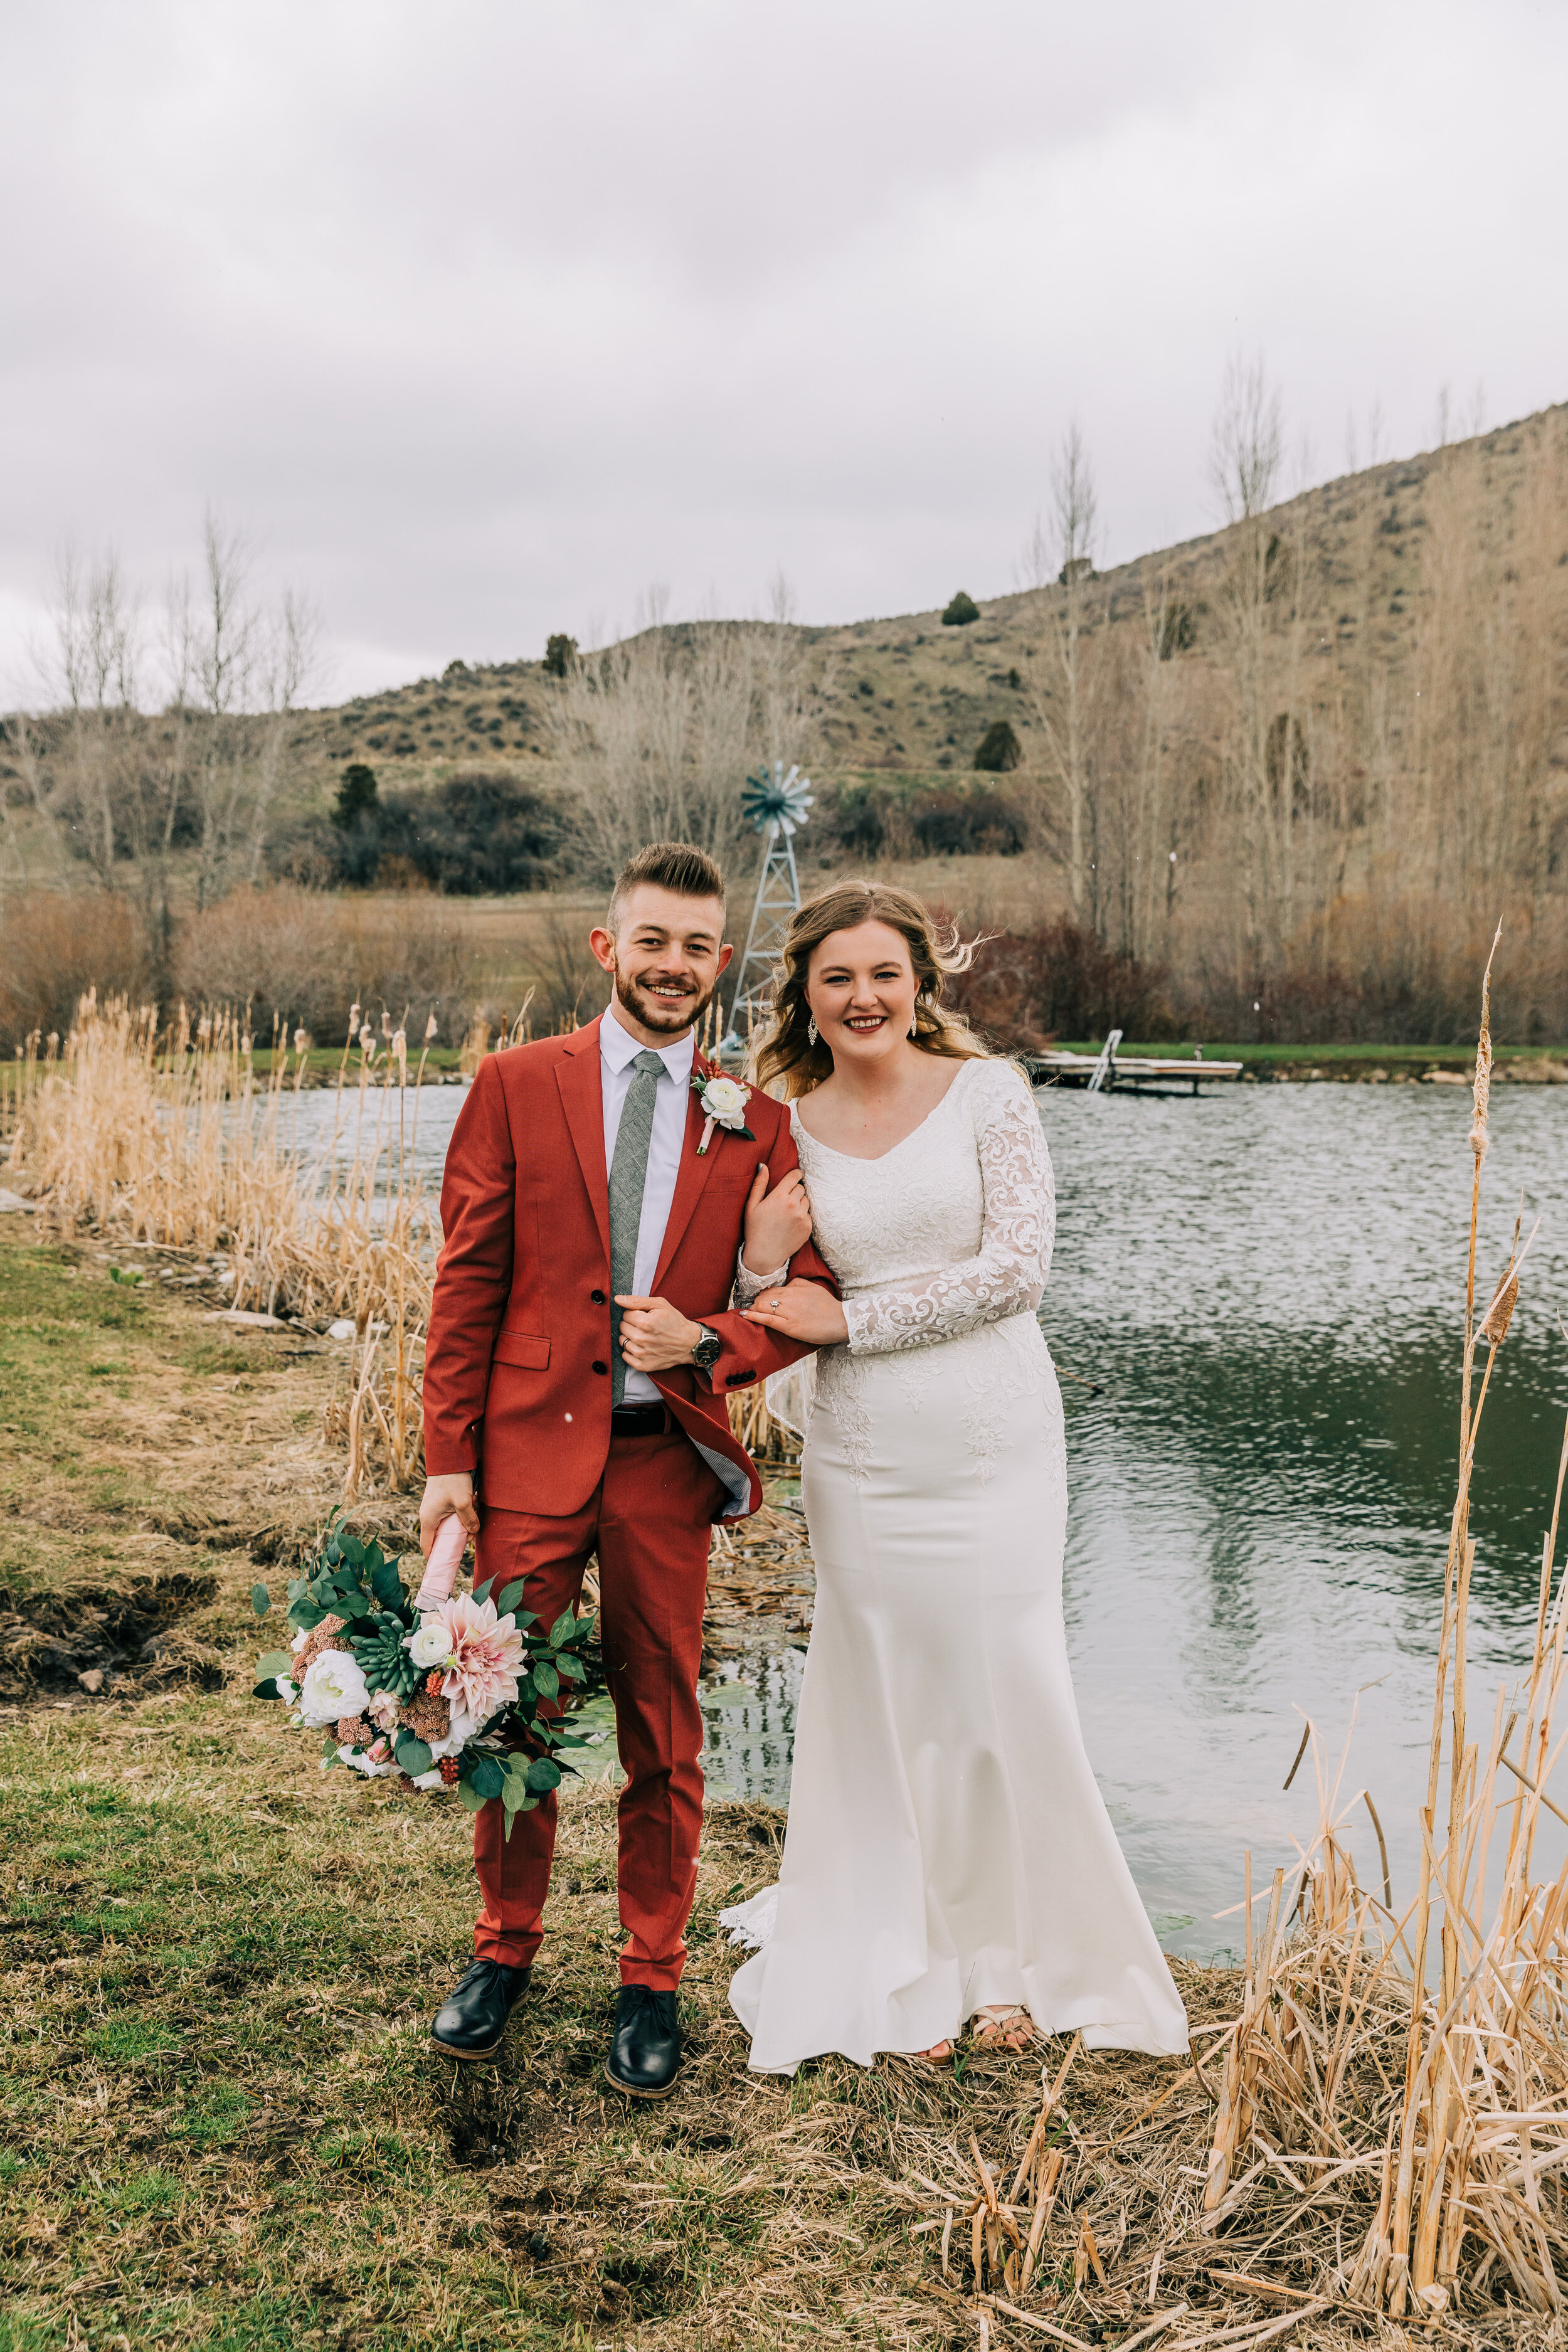  A gorgeous bride and groom standing on the banks of a gorgeous lake in a fall styled wedding session. Preston, Idaho photography elopement photographer couple goals wedding aesthetic inspiration wedding goals groom attire inspiration unique groom ae